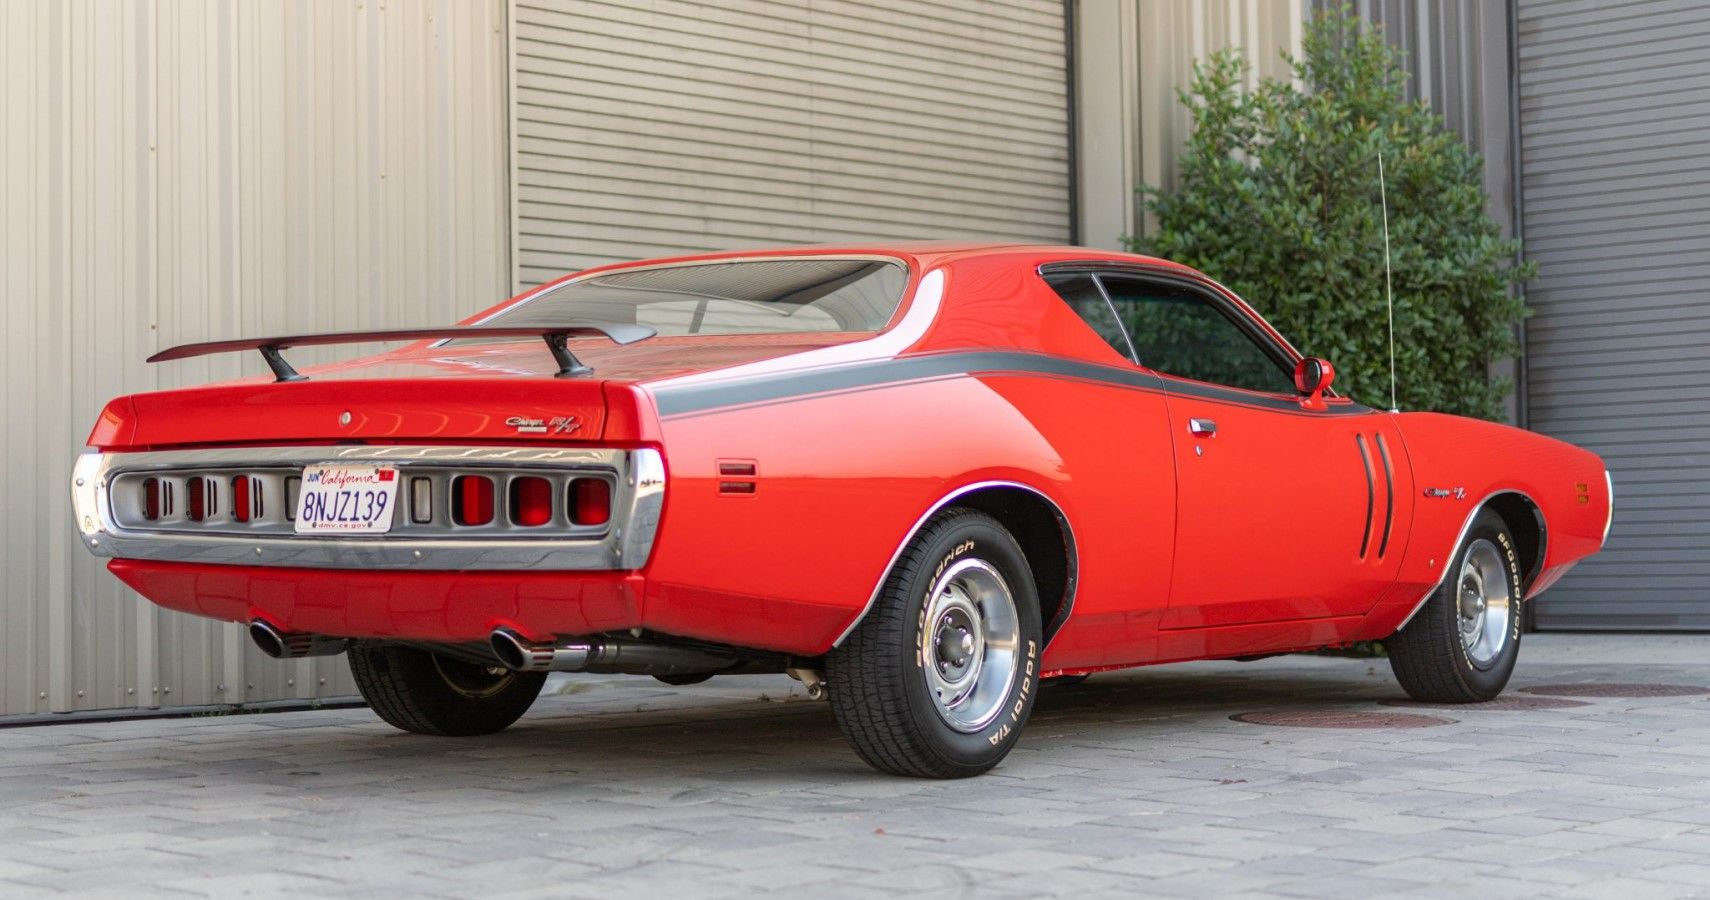 1971 Dodge Charger R/T rear third quarter view